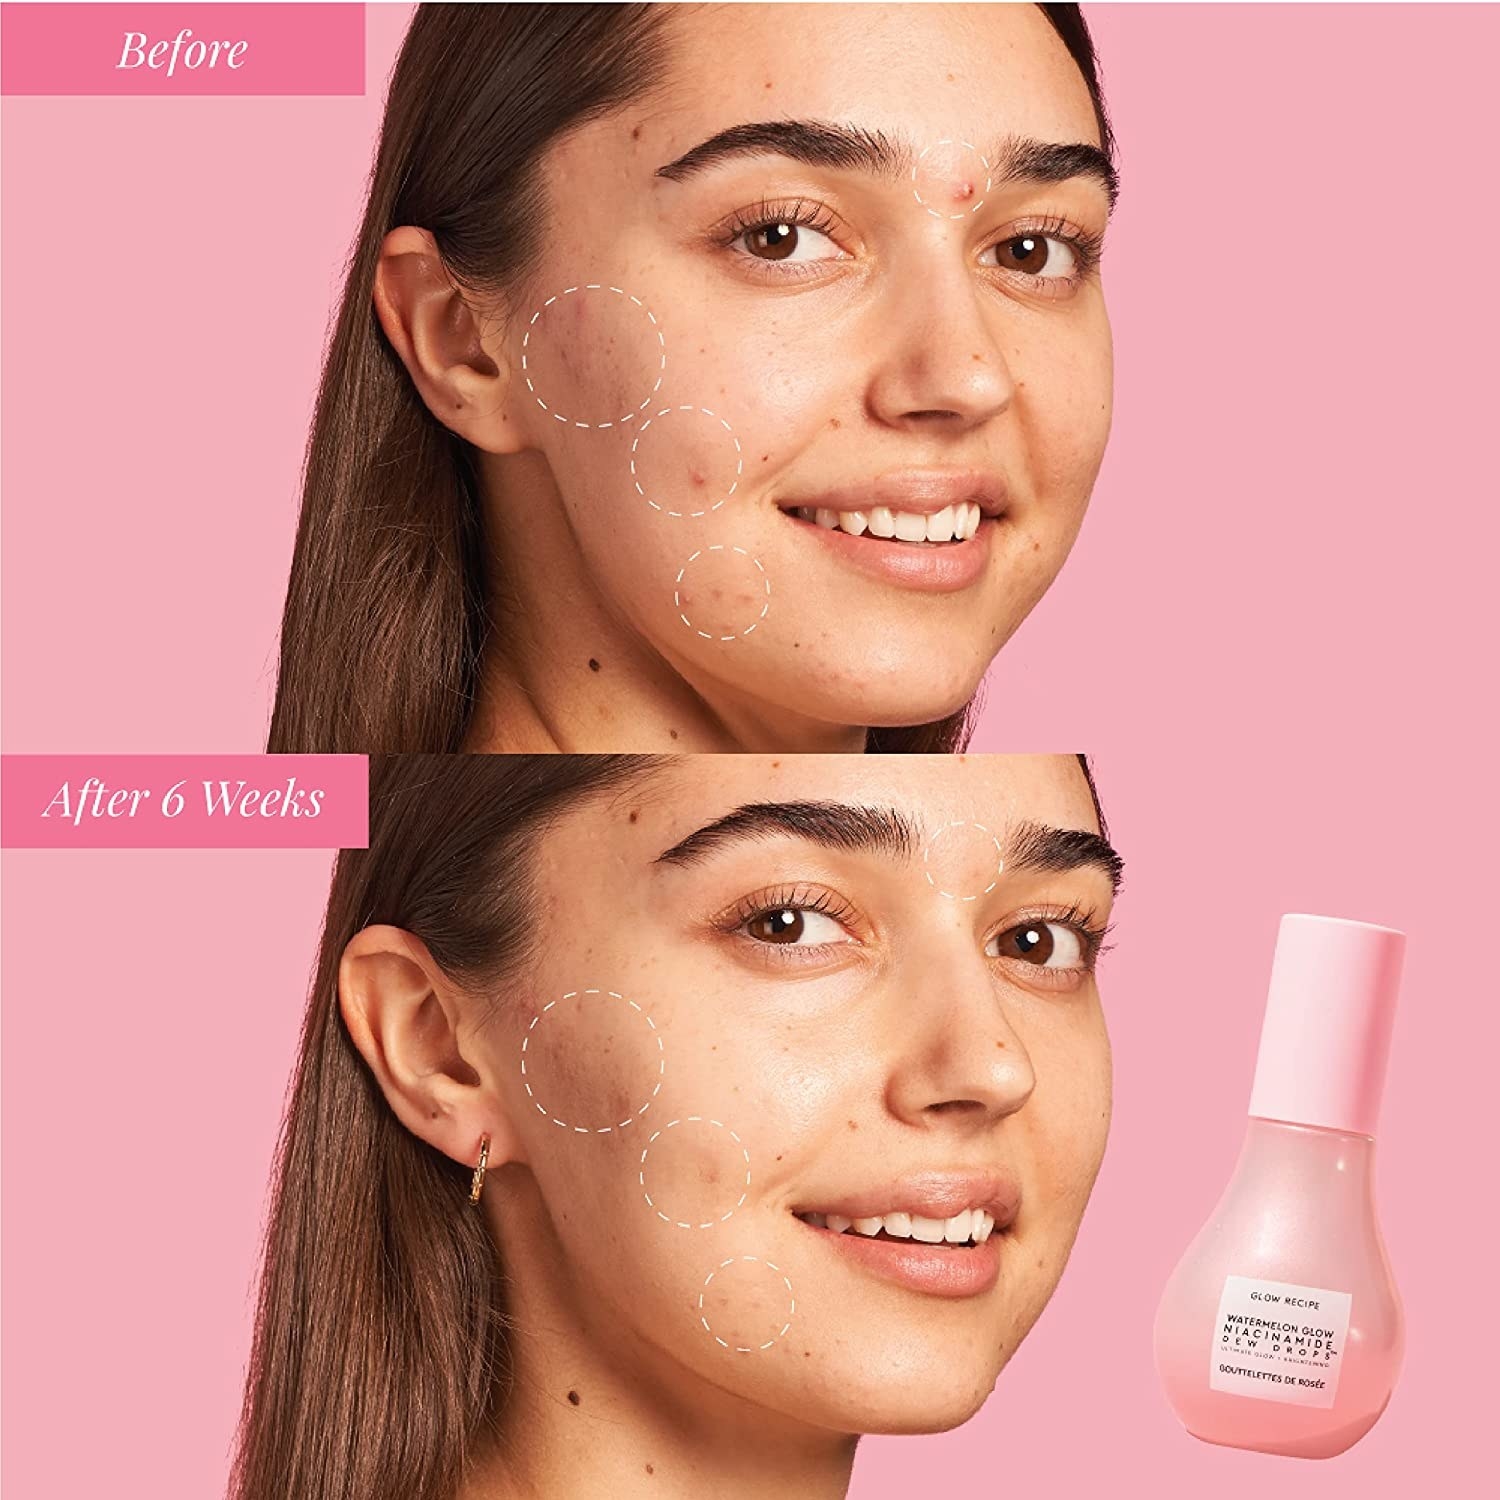 a person before and after using the serum